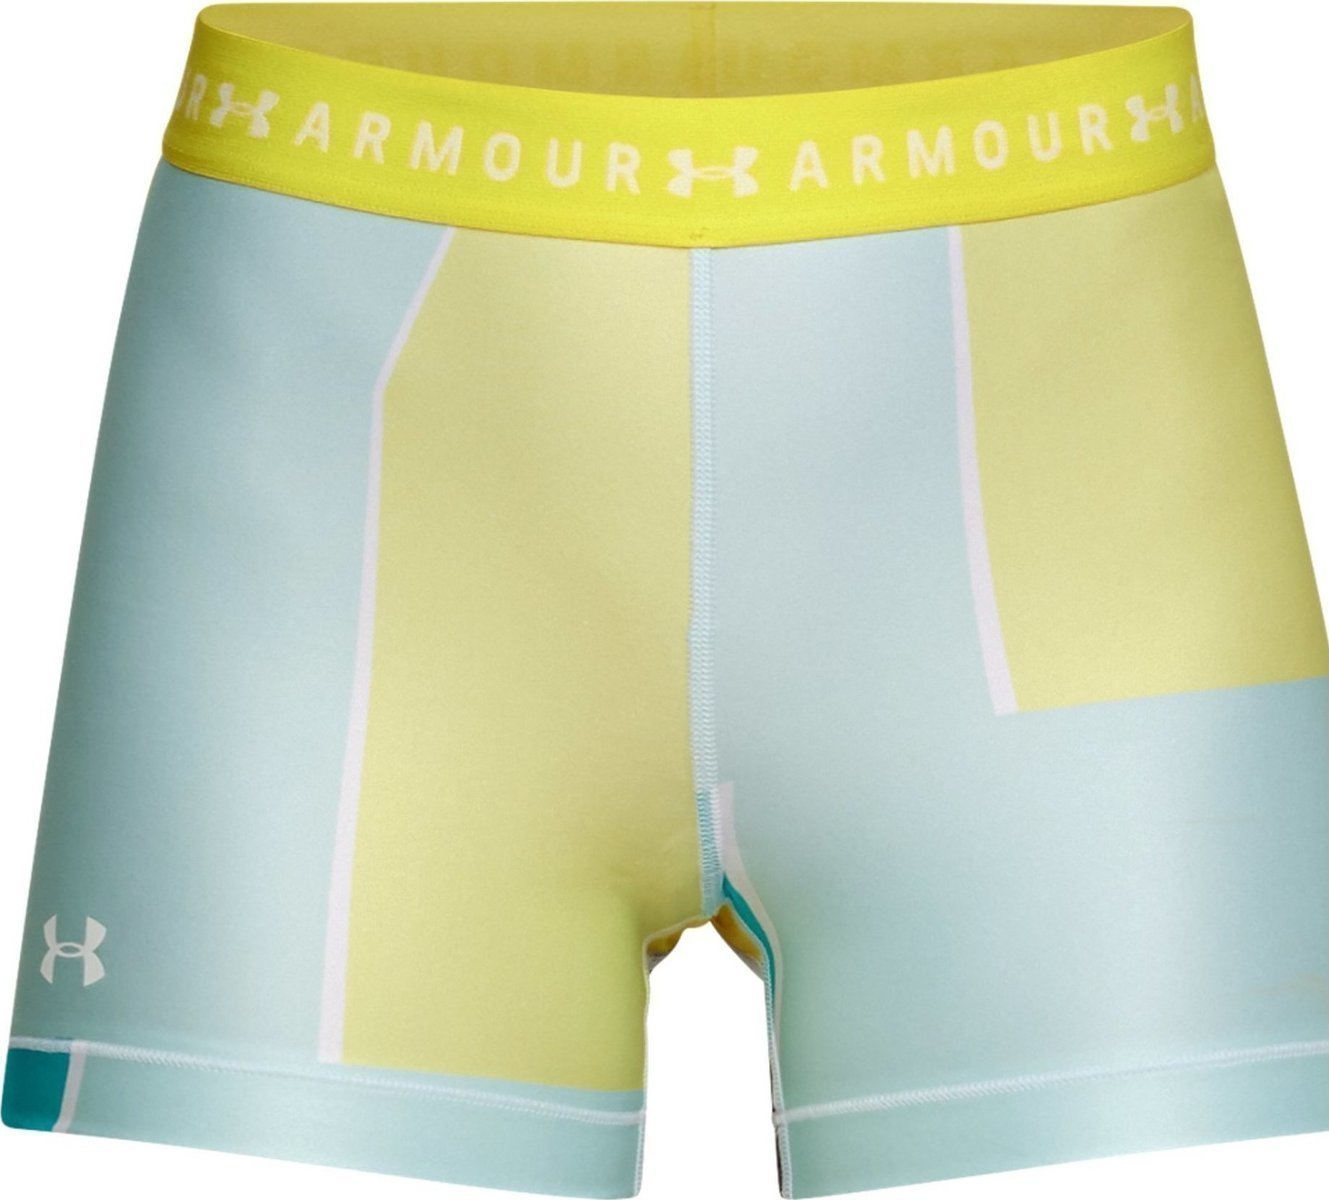 Shorts Under HG Armour Engineer Shorty